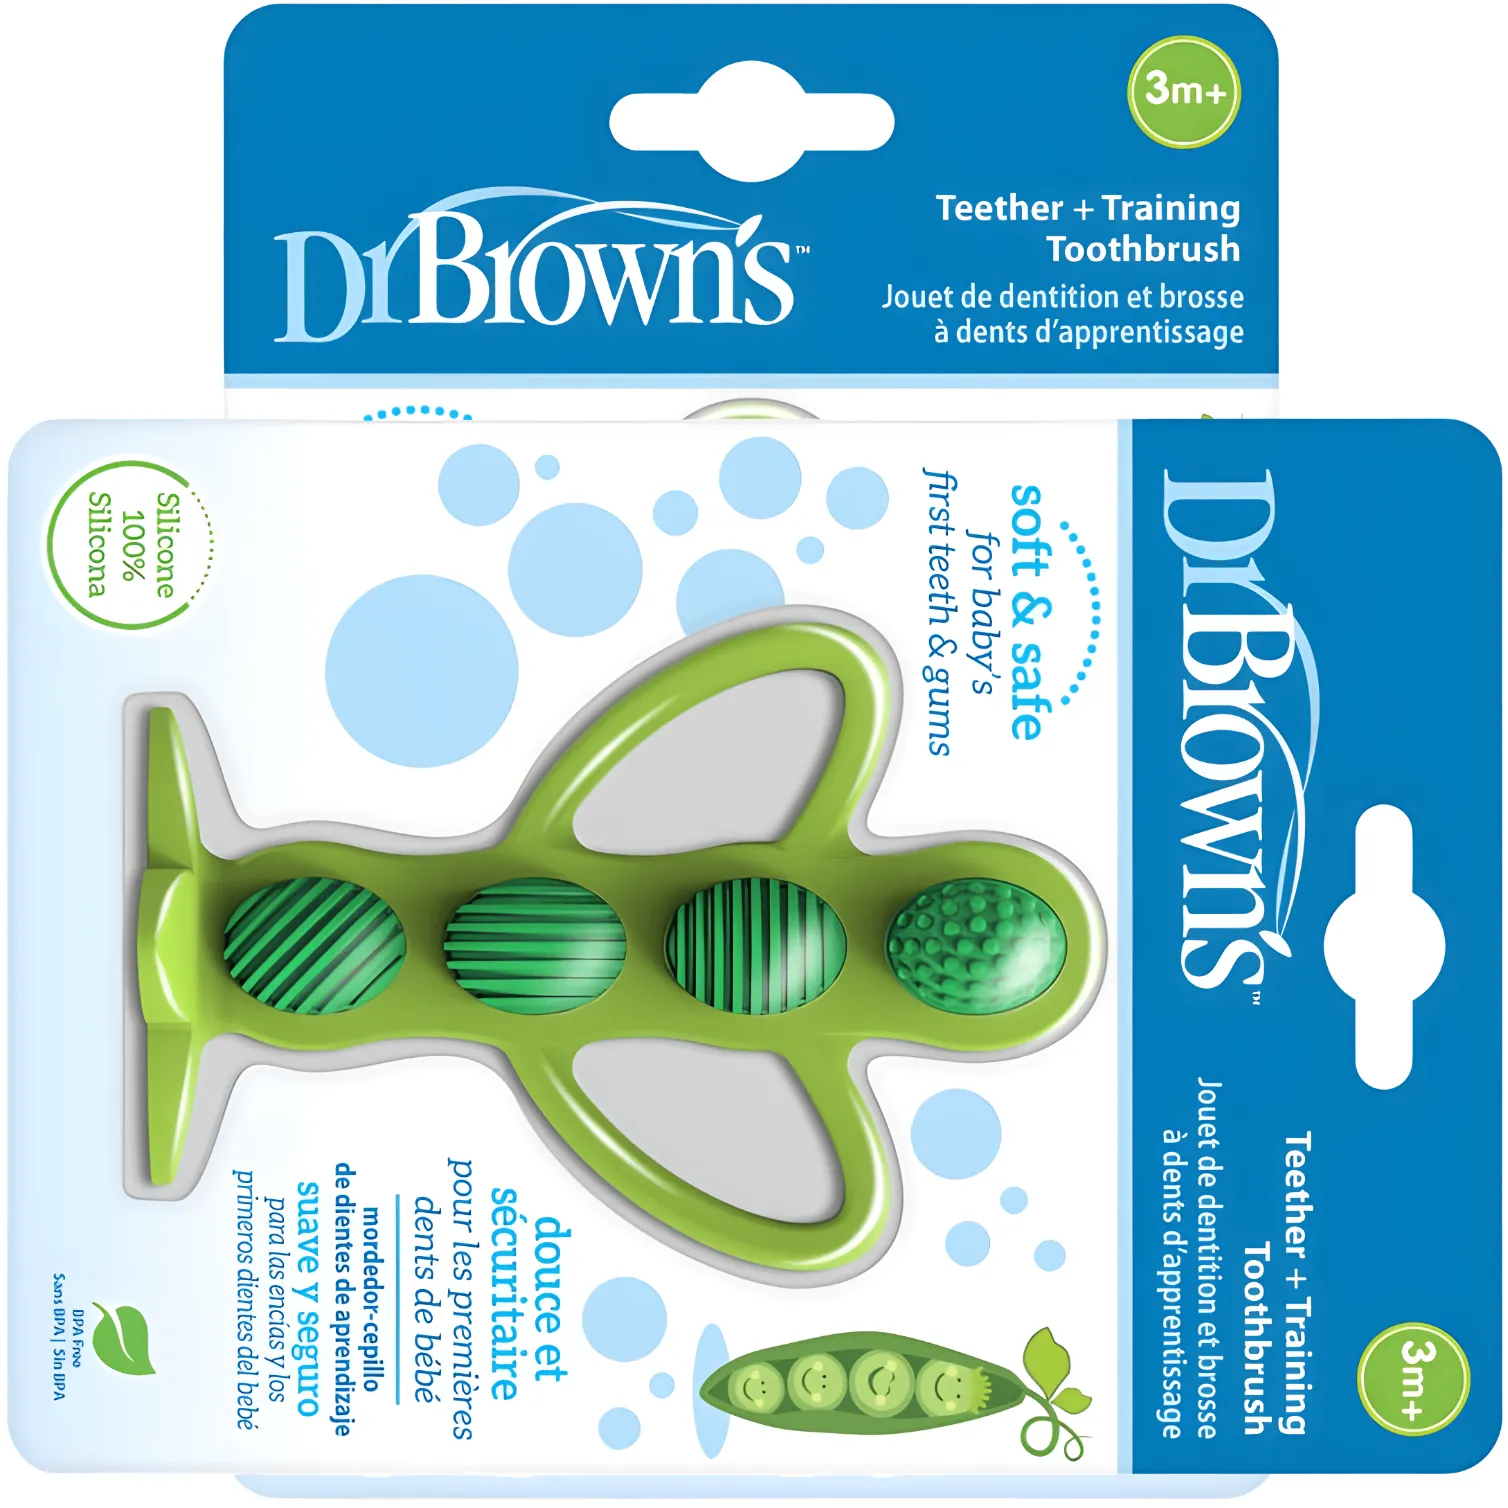 Free Dr. Brown's Peapod Teether + Training Toothbrush